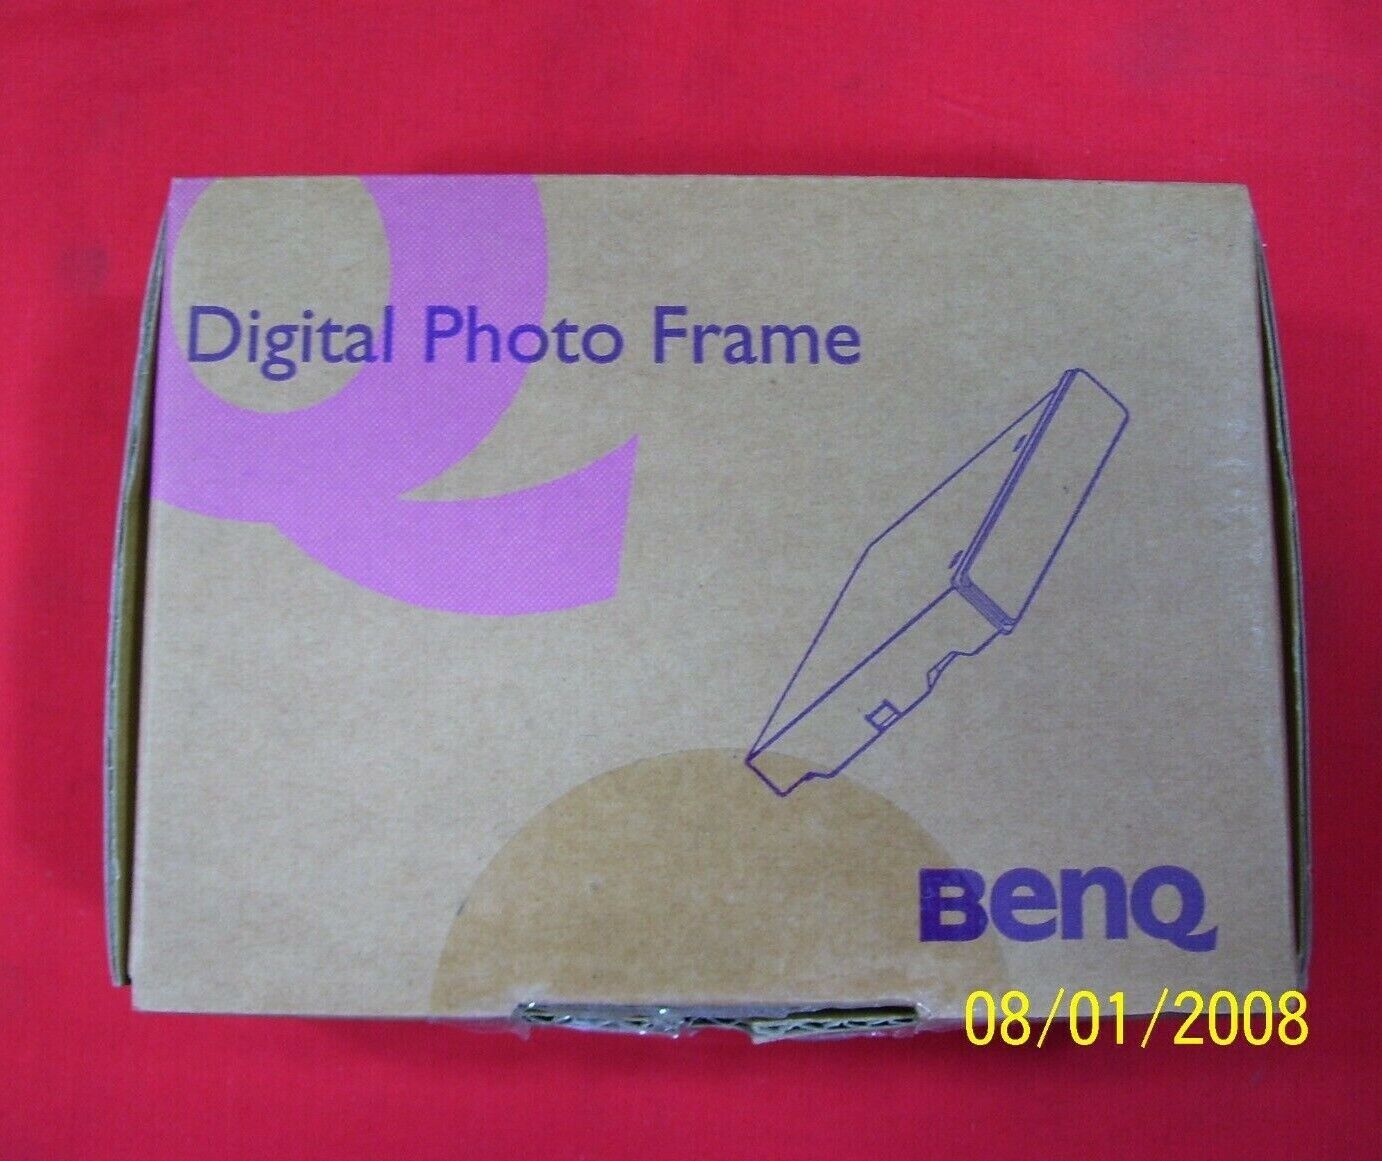 BENQ DIGITAL PHOTO FRAME PICTURE FP791 LCD MONITOR 4-IN-1 MEDIA CARD READER